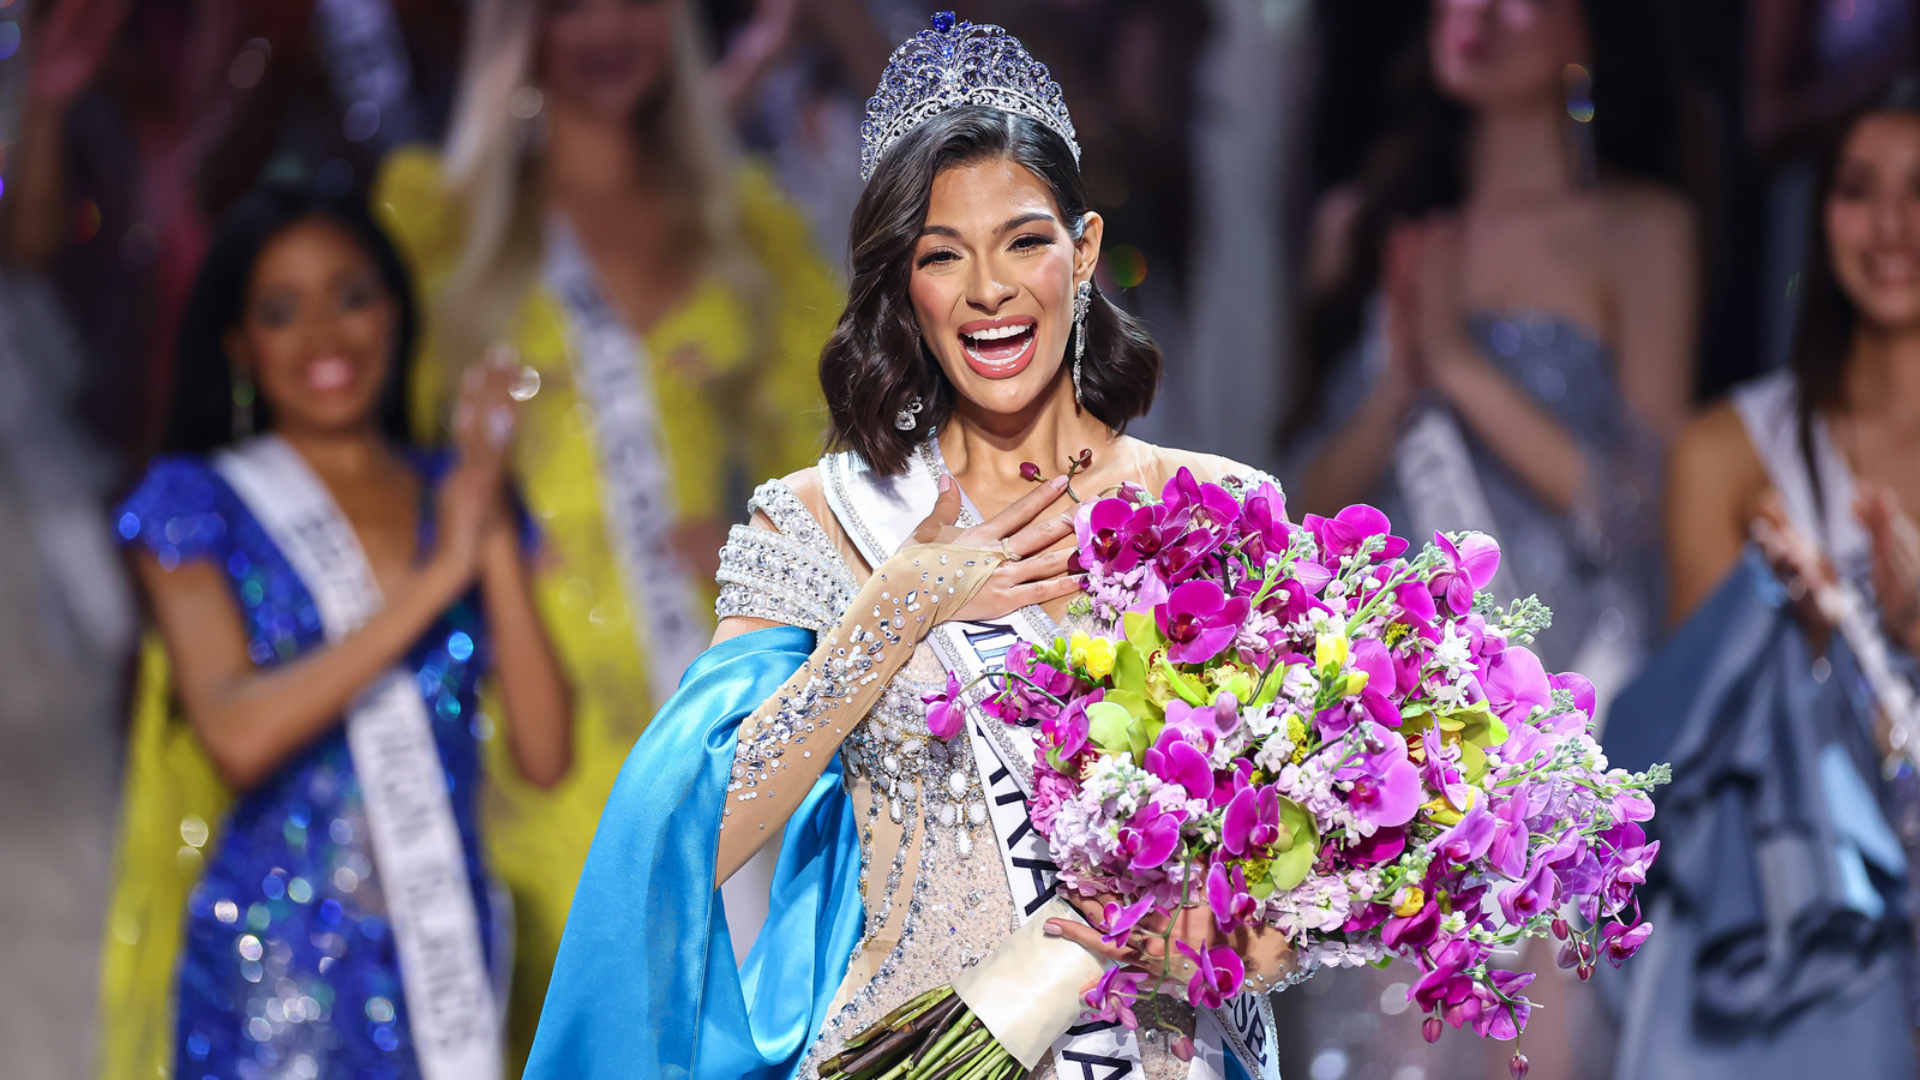 The massive support of Filipino fans brought Miss Universe Sheynnis Palacios to tears during the parade at Mall of Asia.